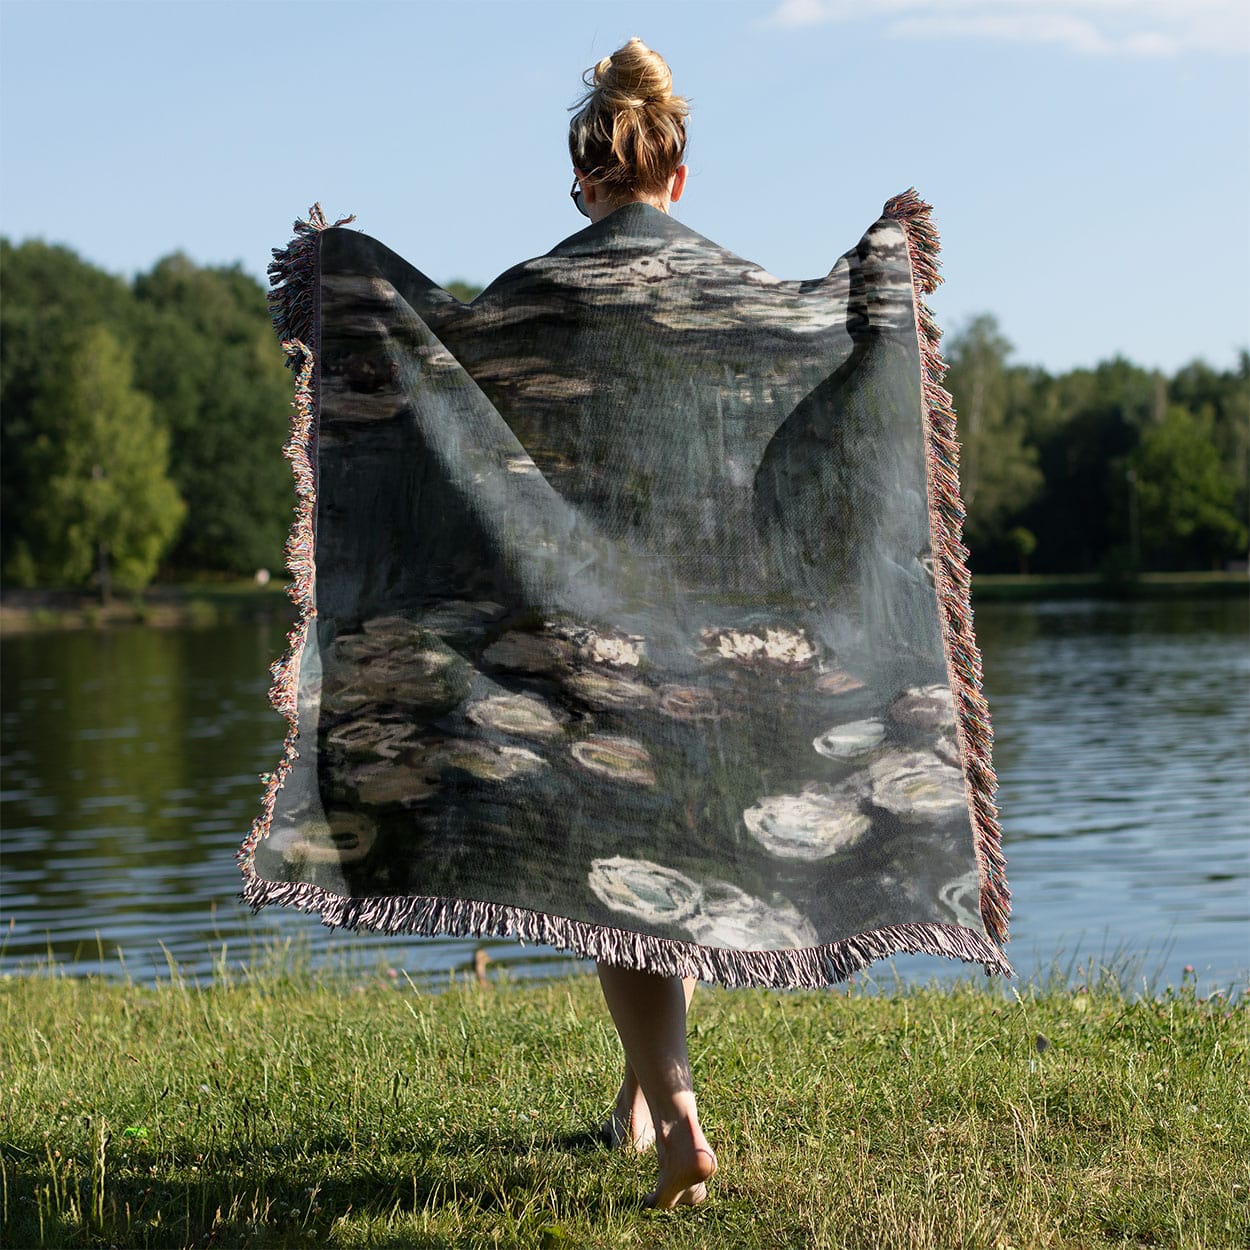 Relaxing Water Painting Woven Blanket Held on a Woman's Back Outside